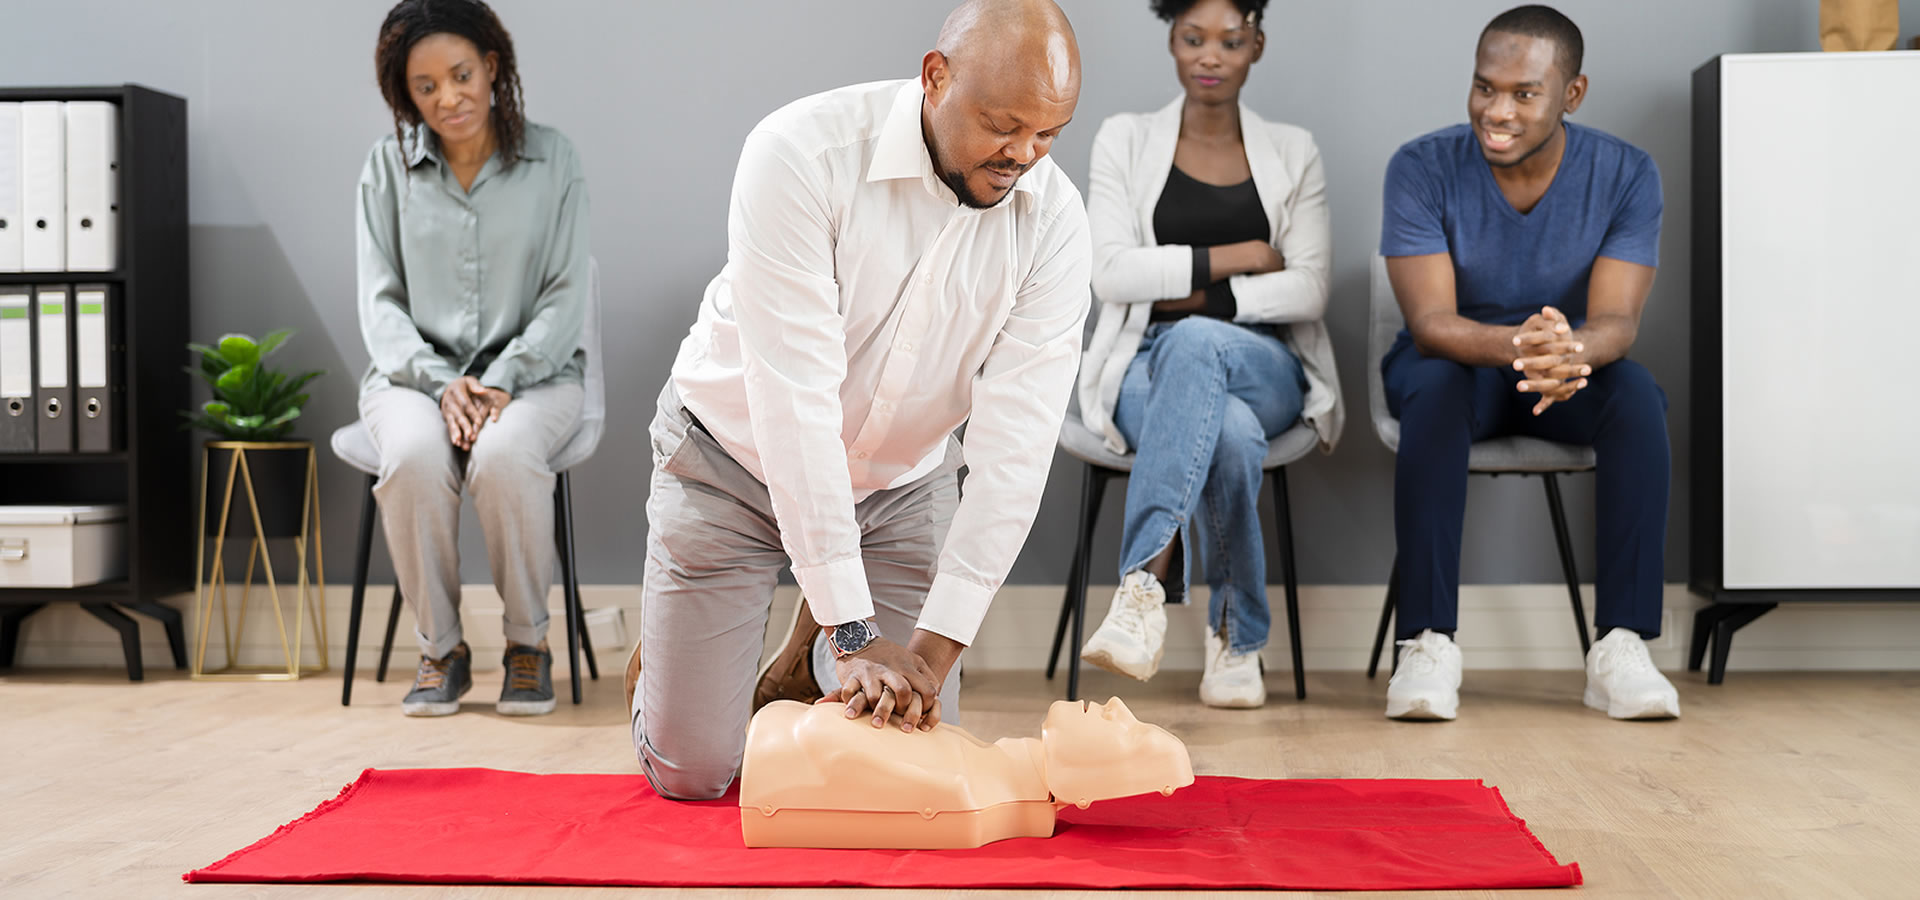 What Are the Differences Between ACLS and BLS?